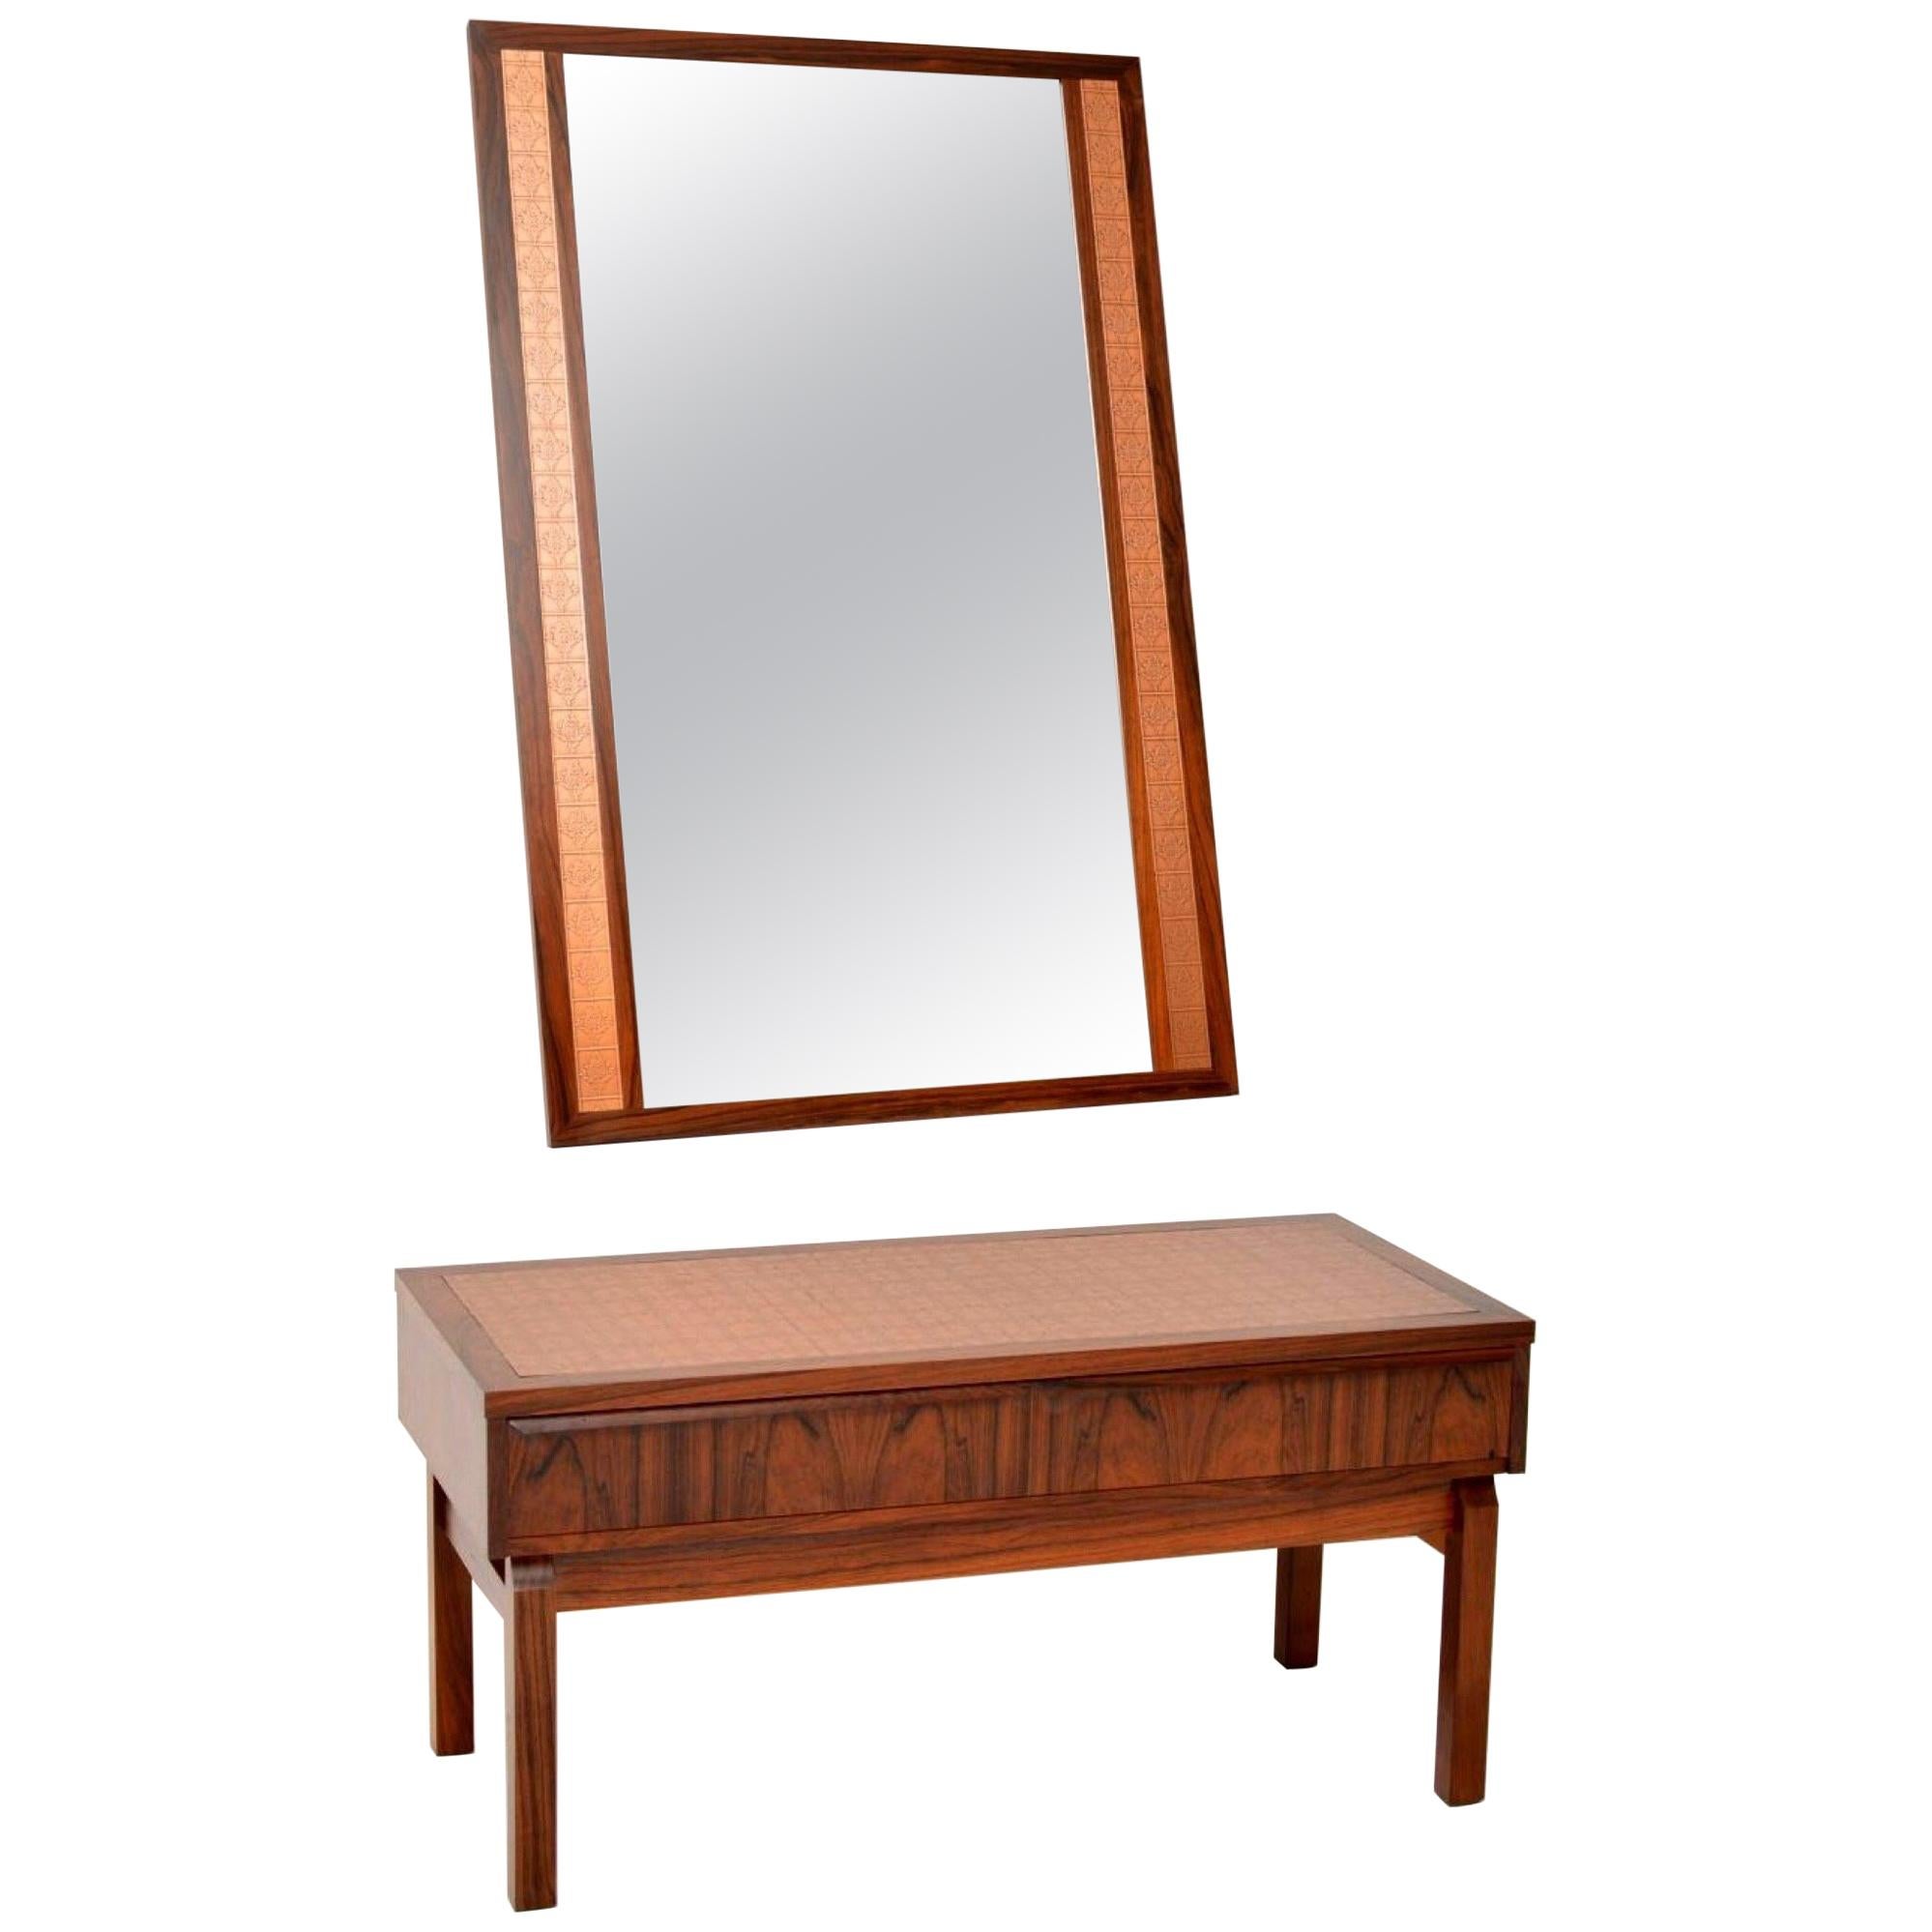 1960s Danish Wood and Copper Side Table and Mirror